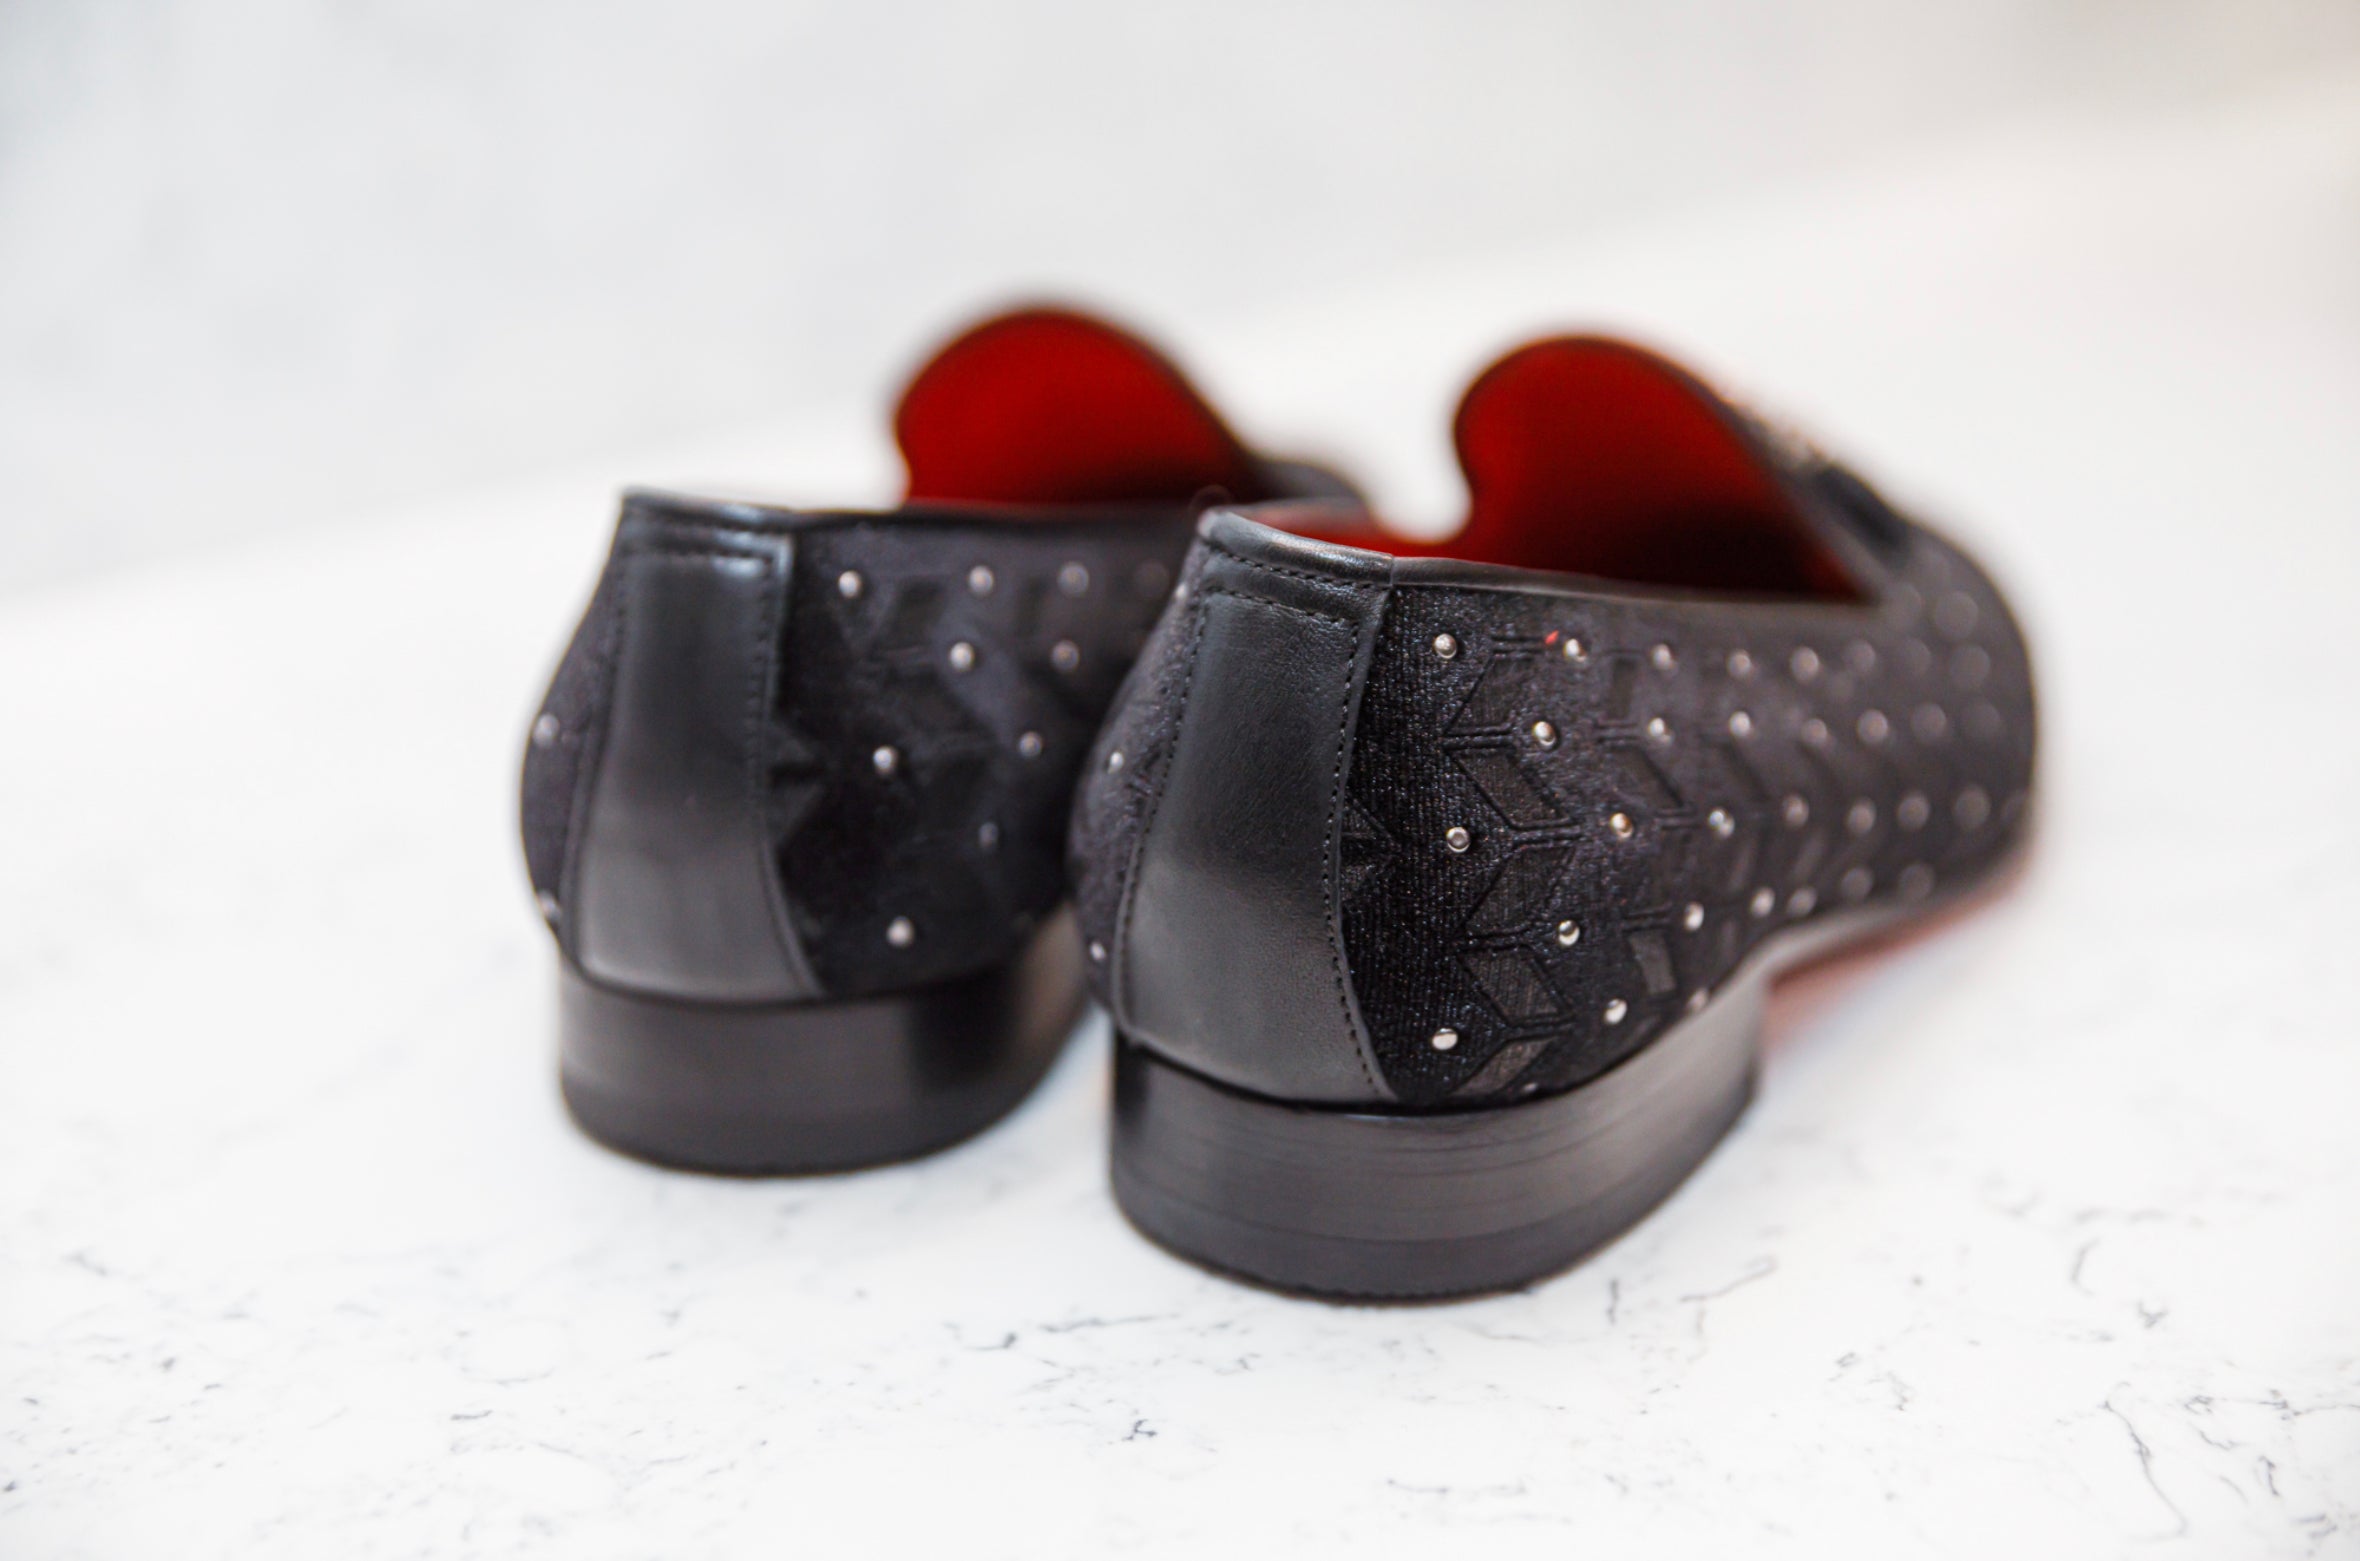 The Barrack Diamond Loafers - Loafers by Urbbana